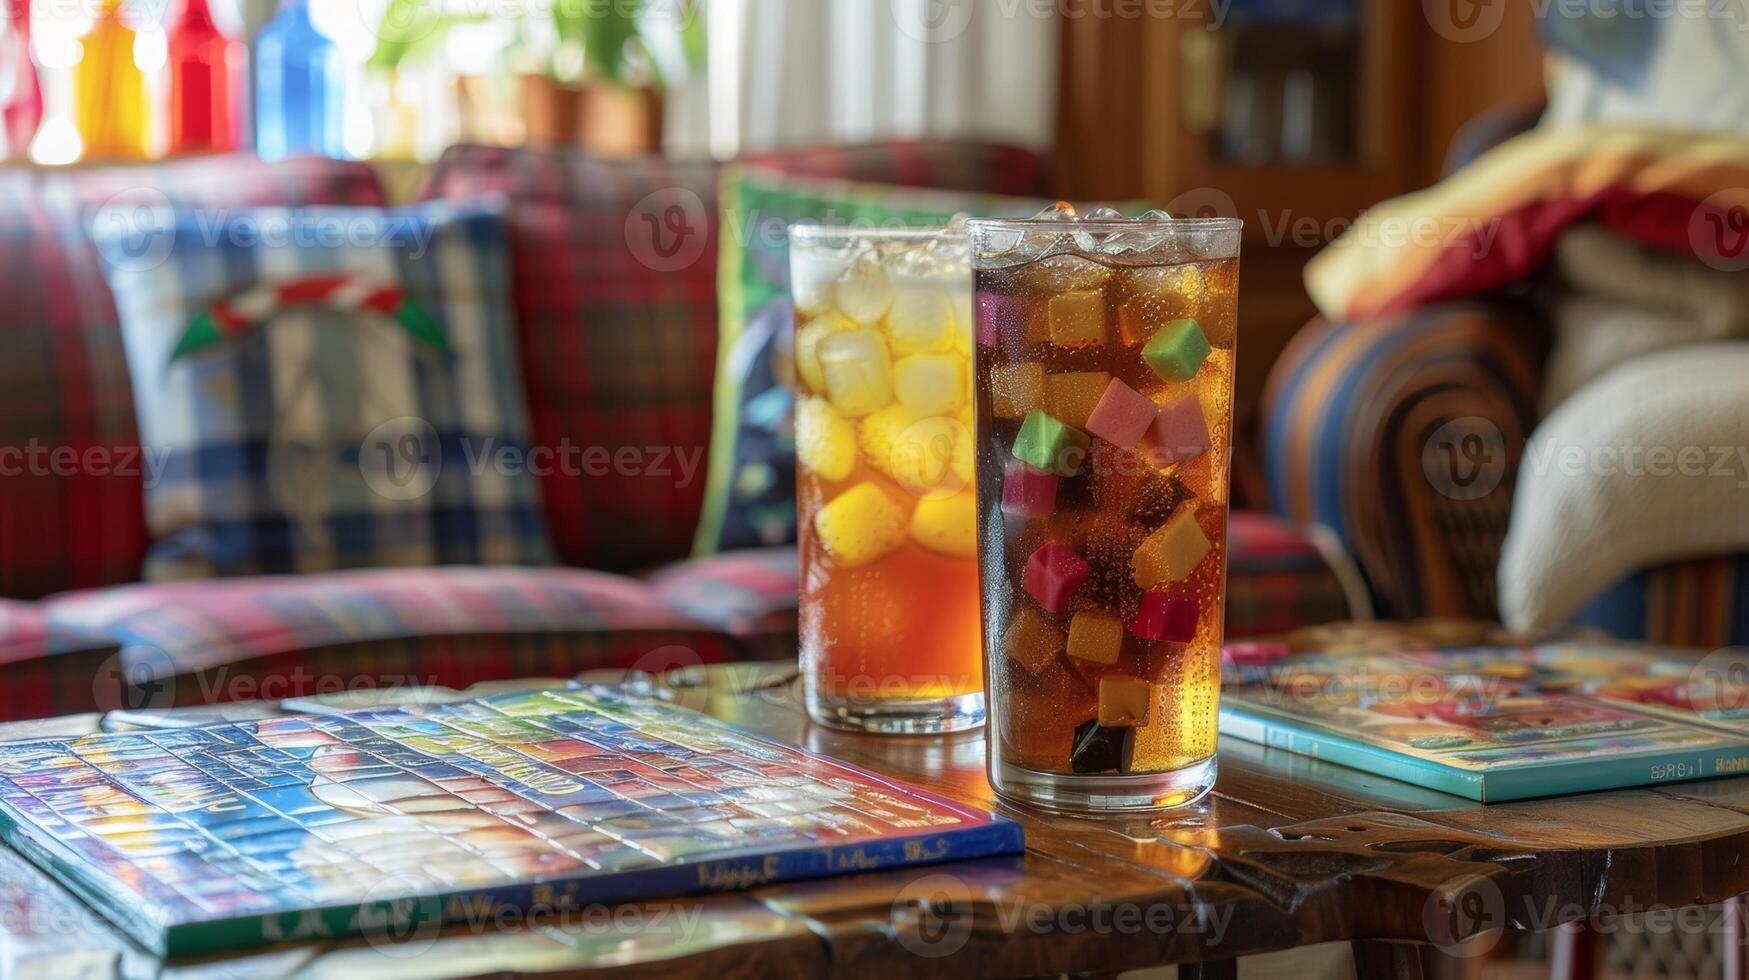 Classic board games and puzzles are available for guests to play while sipping on their sodas photo